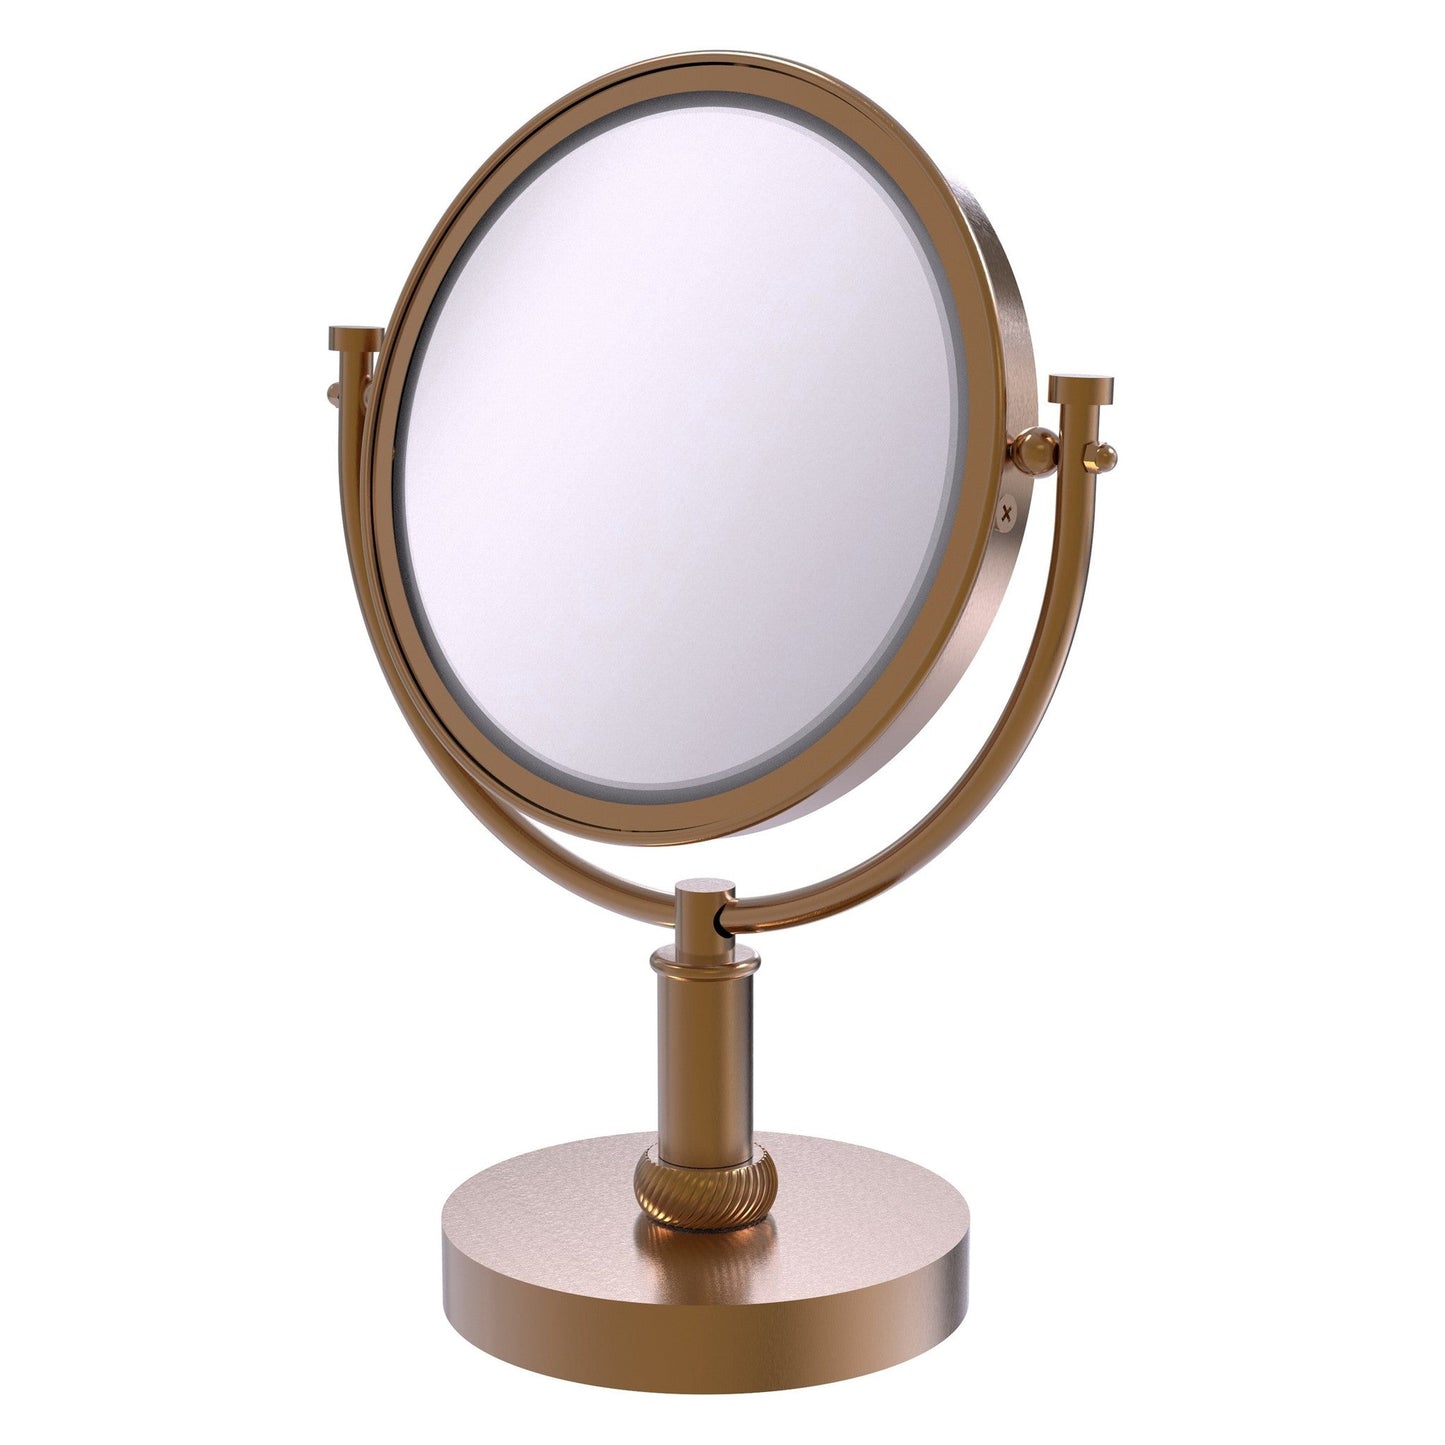 Allied Brass DM-4T/2X 8" x 8" Brushed Bronze Solid Brass Vanity Top Make-Up Mirror 2X Magnification